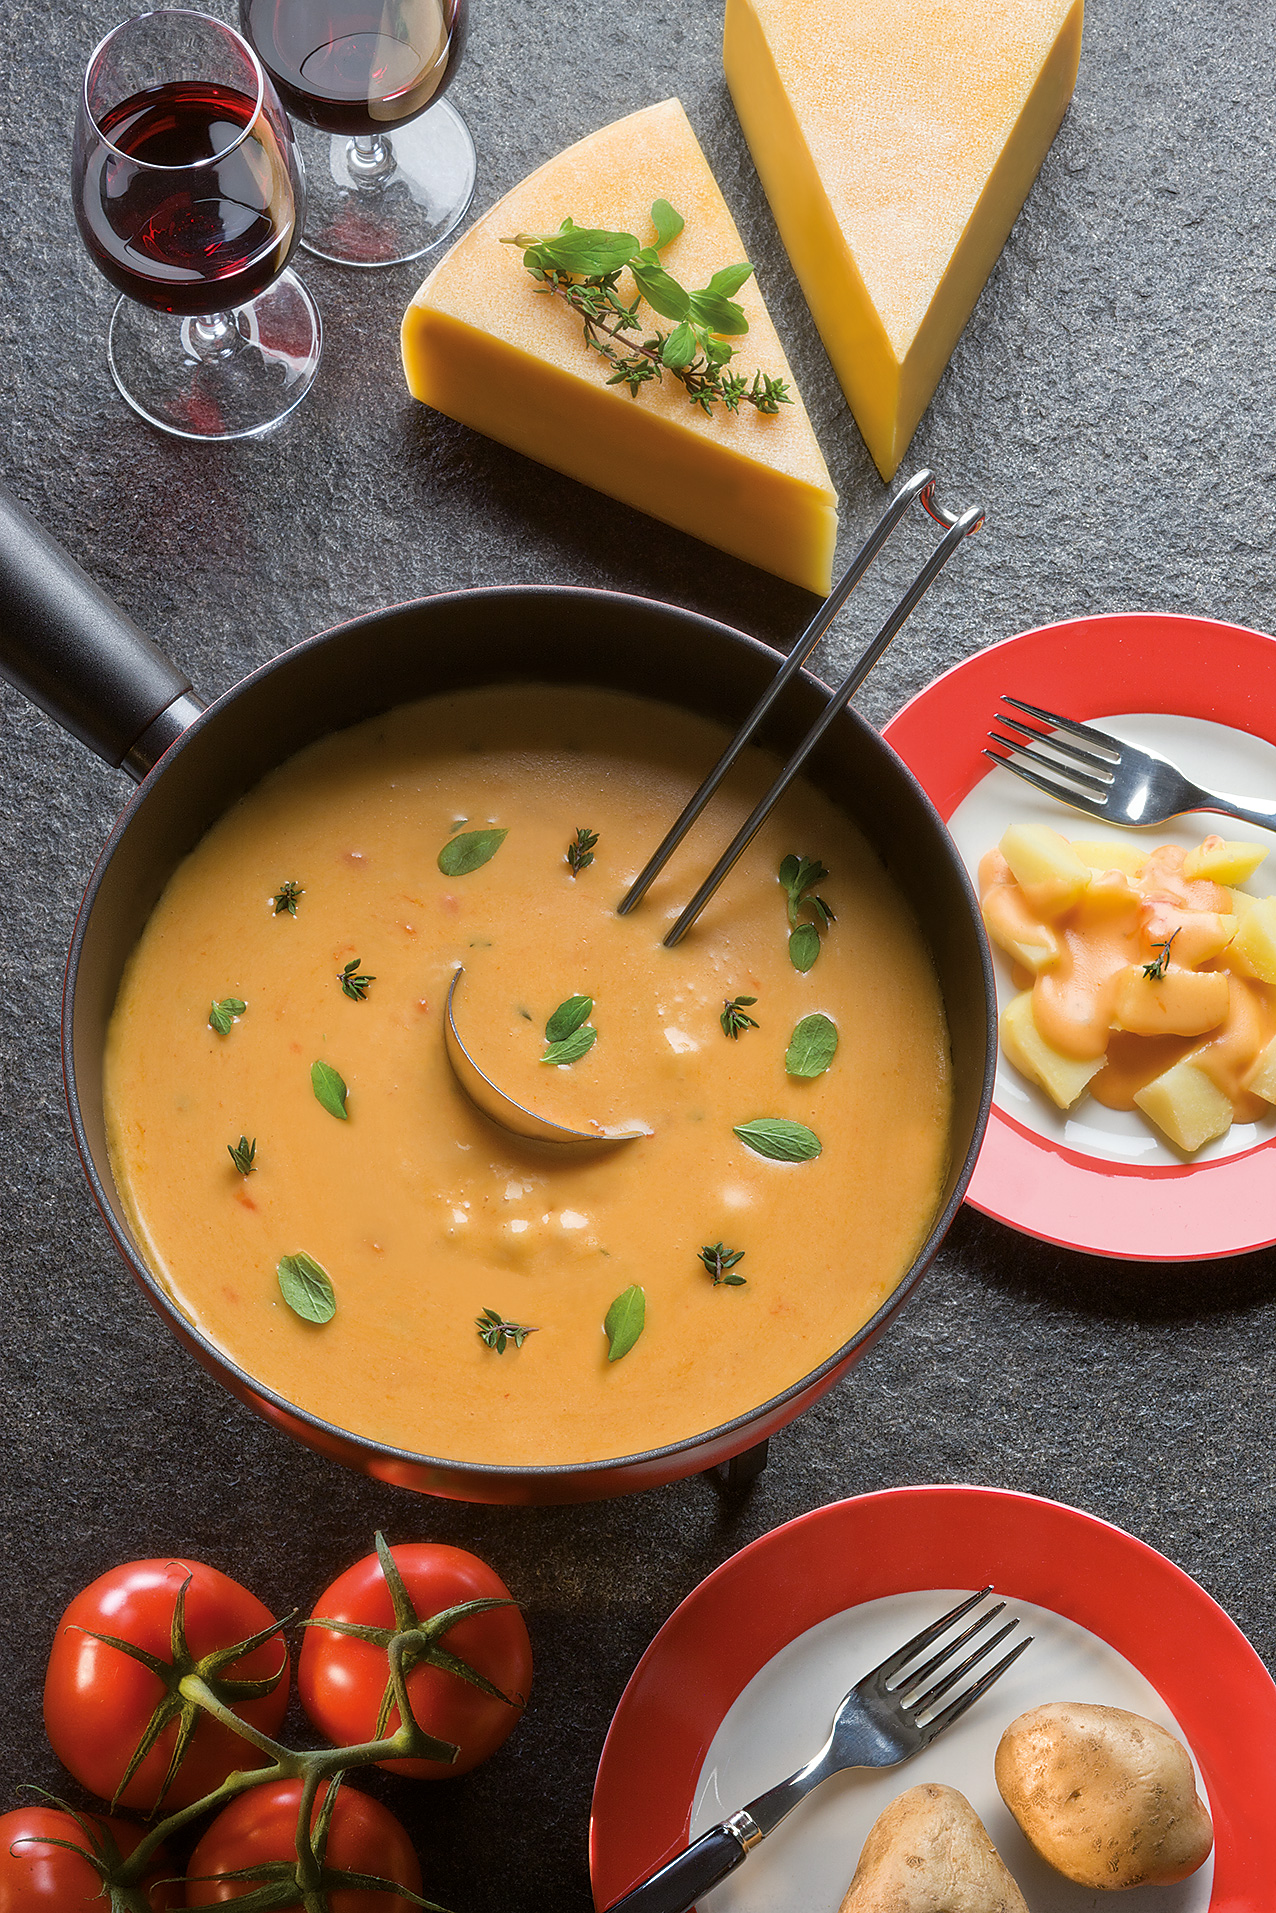 Fondue savoyarde à la tomate - Cookidoo® – the official Thermomix